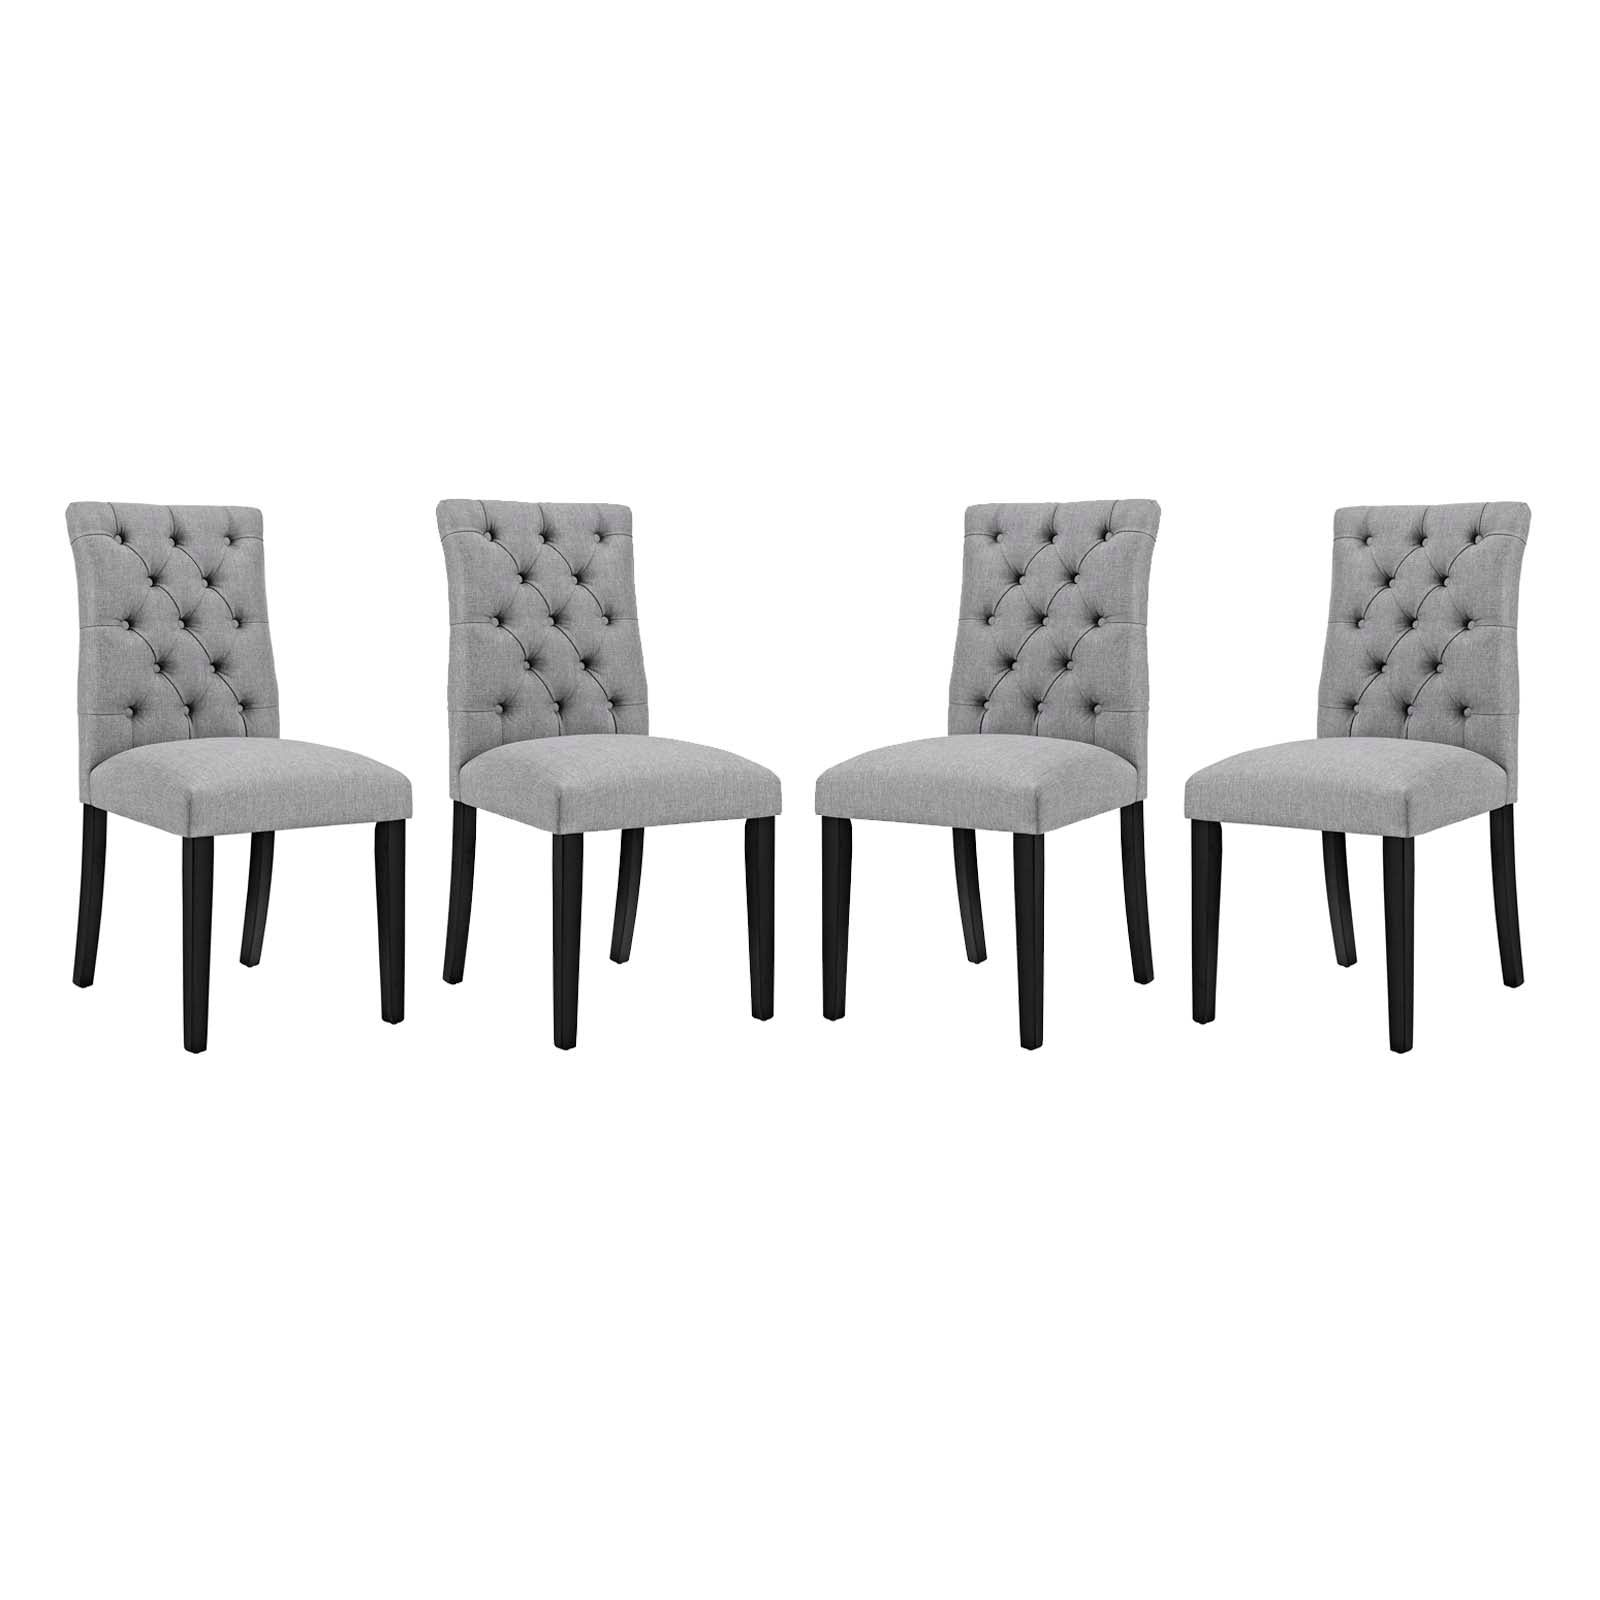 Modway Dining Chairs - Duchess Dining Chair Fabric Light Gray (Set of 4)